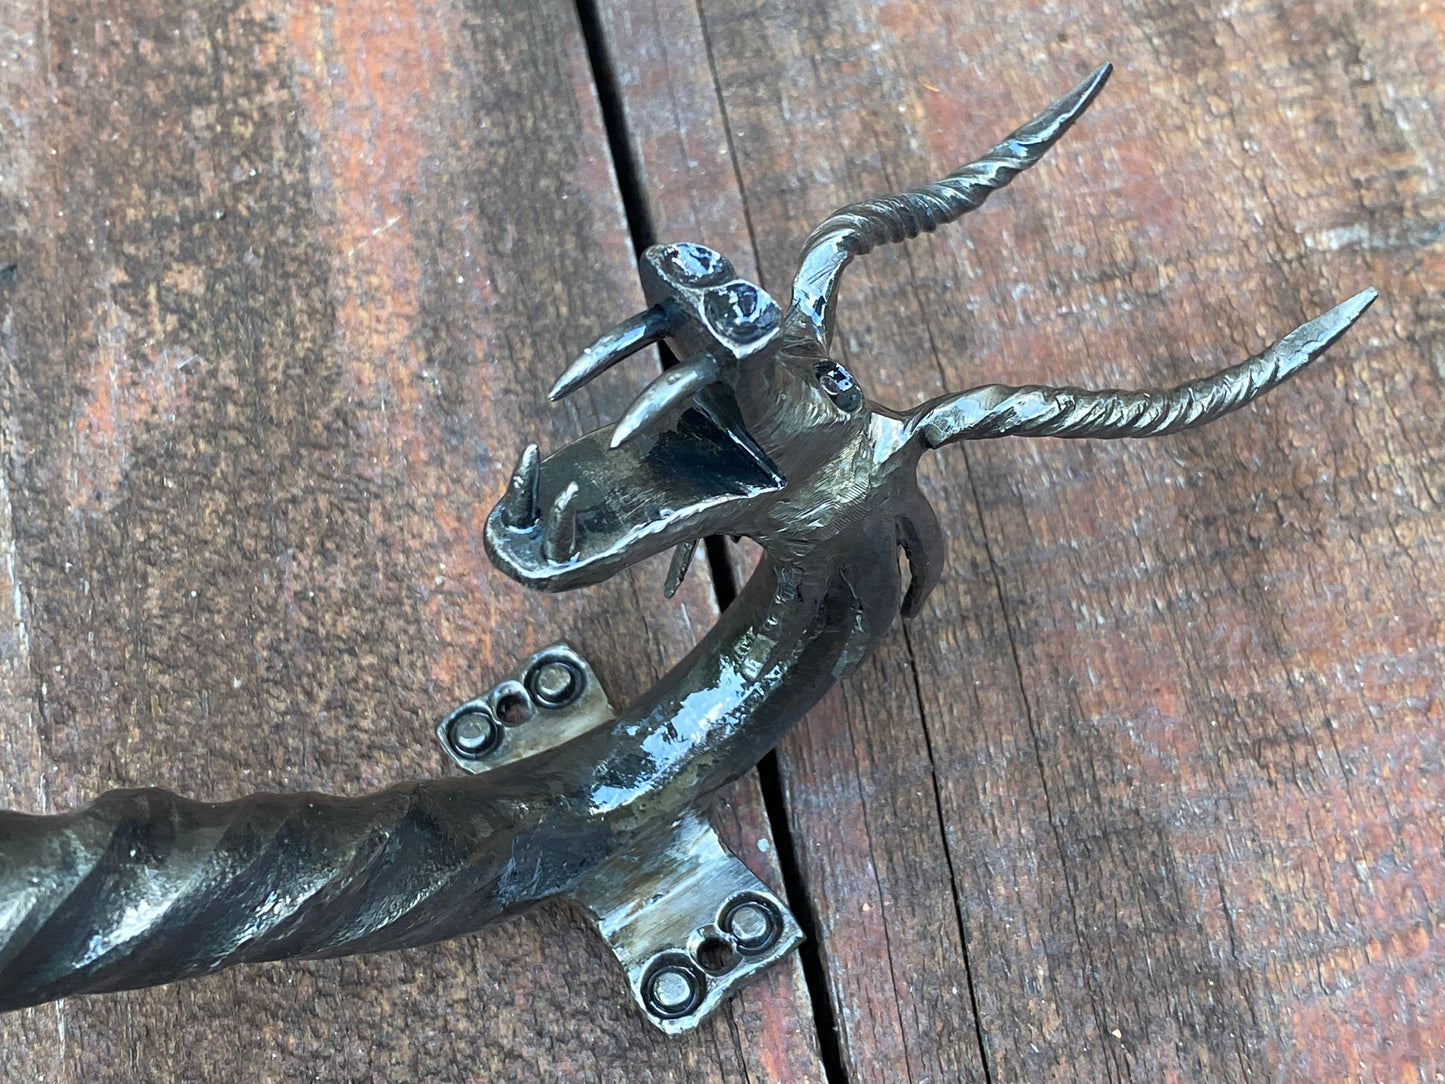 Dragon, door handle, door pull, medieval, viking, renovation, Christmas, birthday, castle, man cave, horn, barn, anniversary, Middle Ages